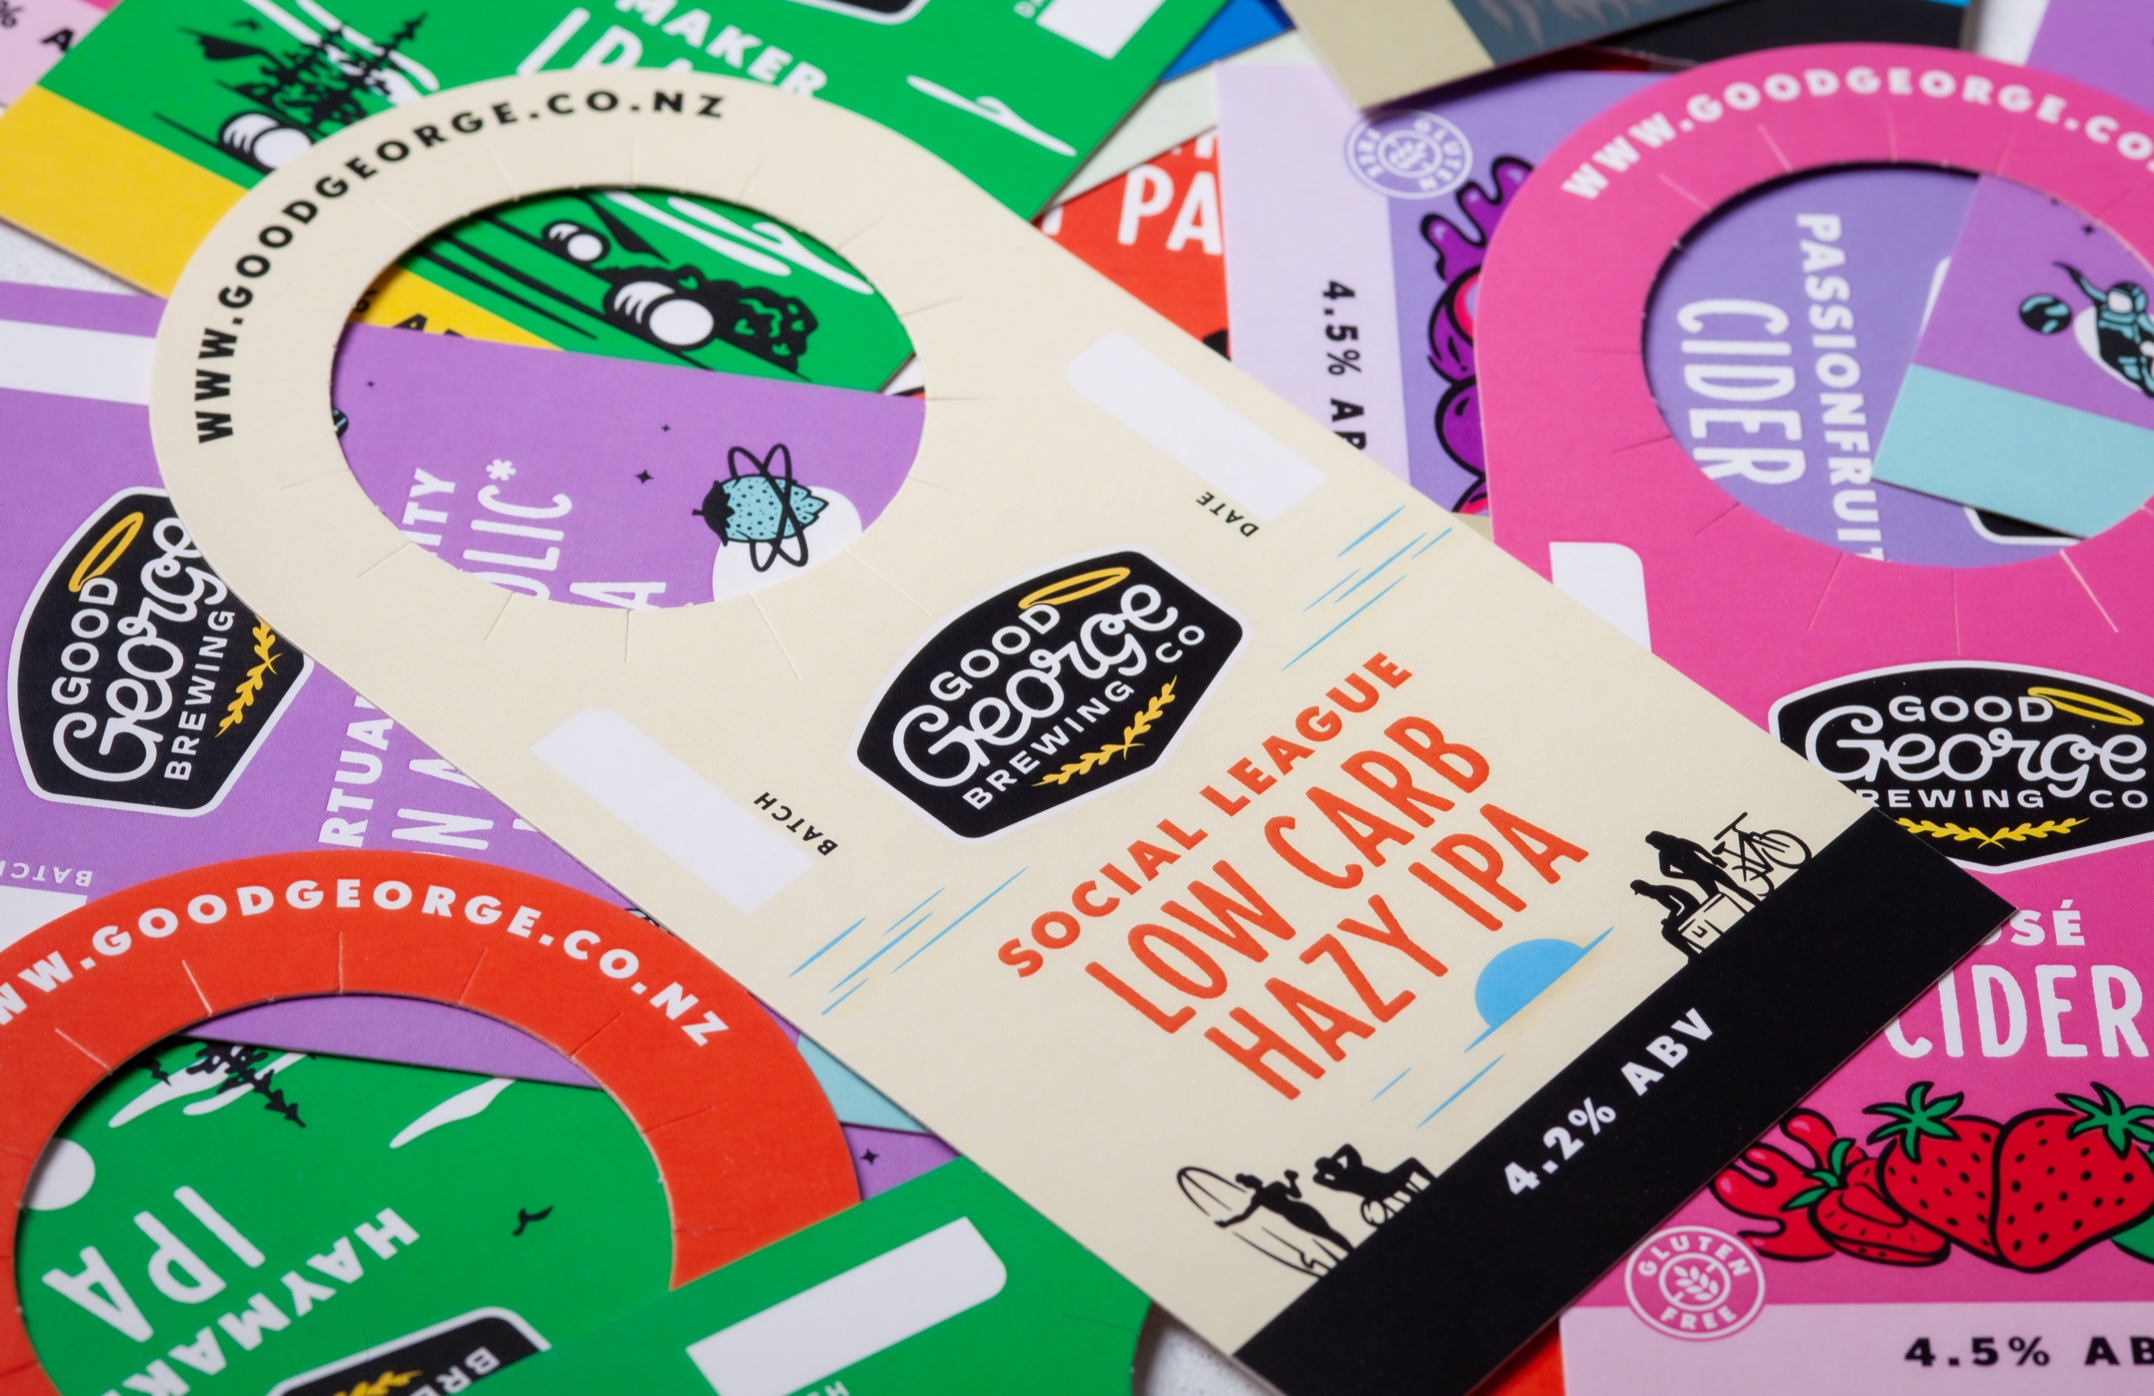 Premium Keg Collar Printing: Reflecting Good George Brewing Co.'s Commitment to Craft